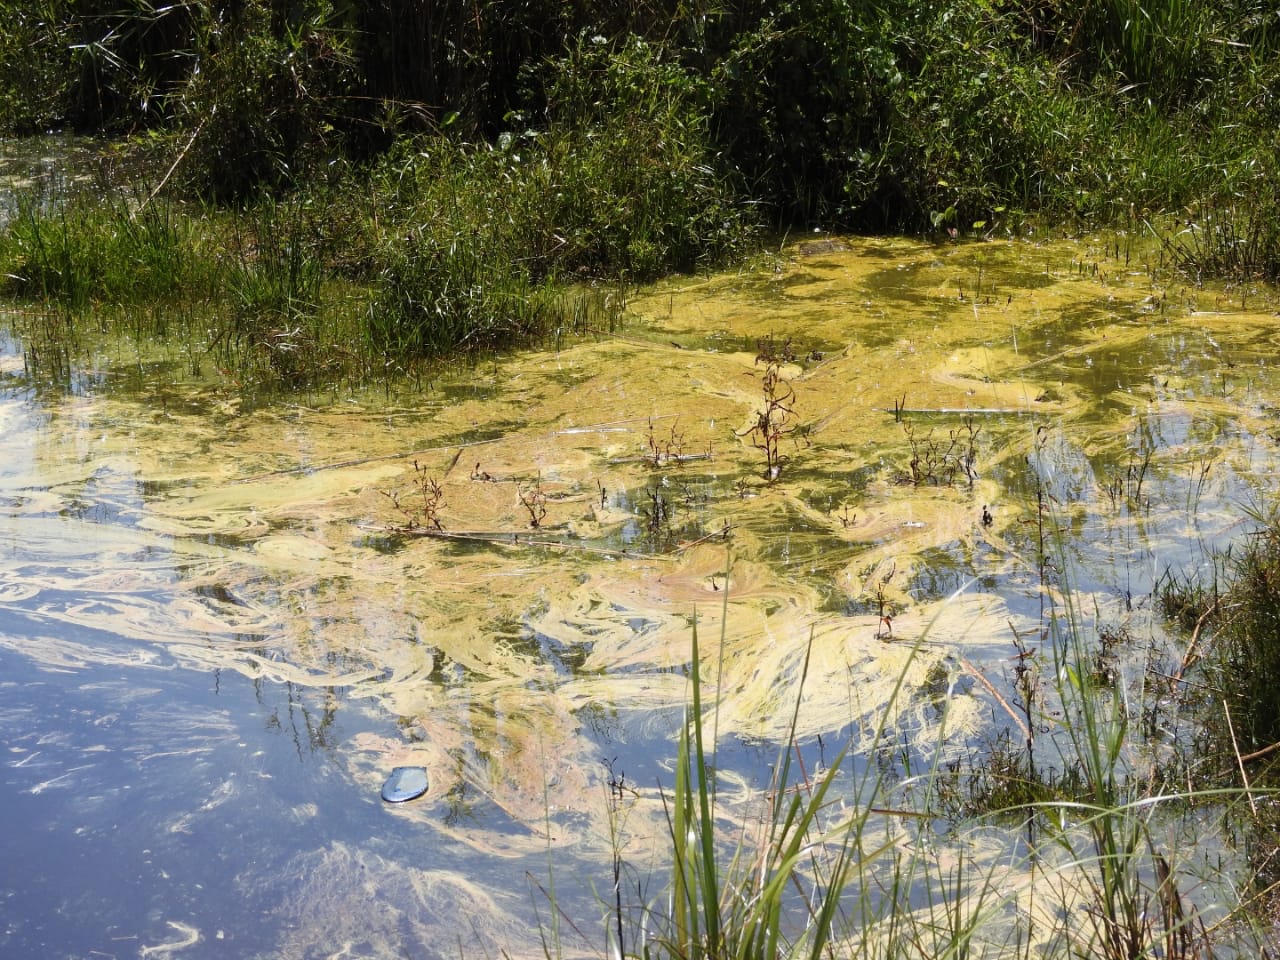 Oil covers the water of the Maguri-Motapung wetland